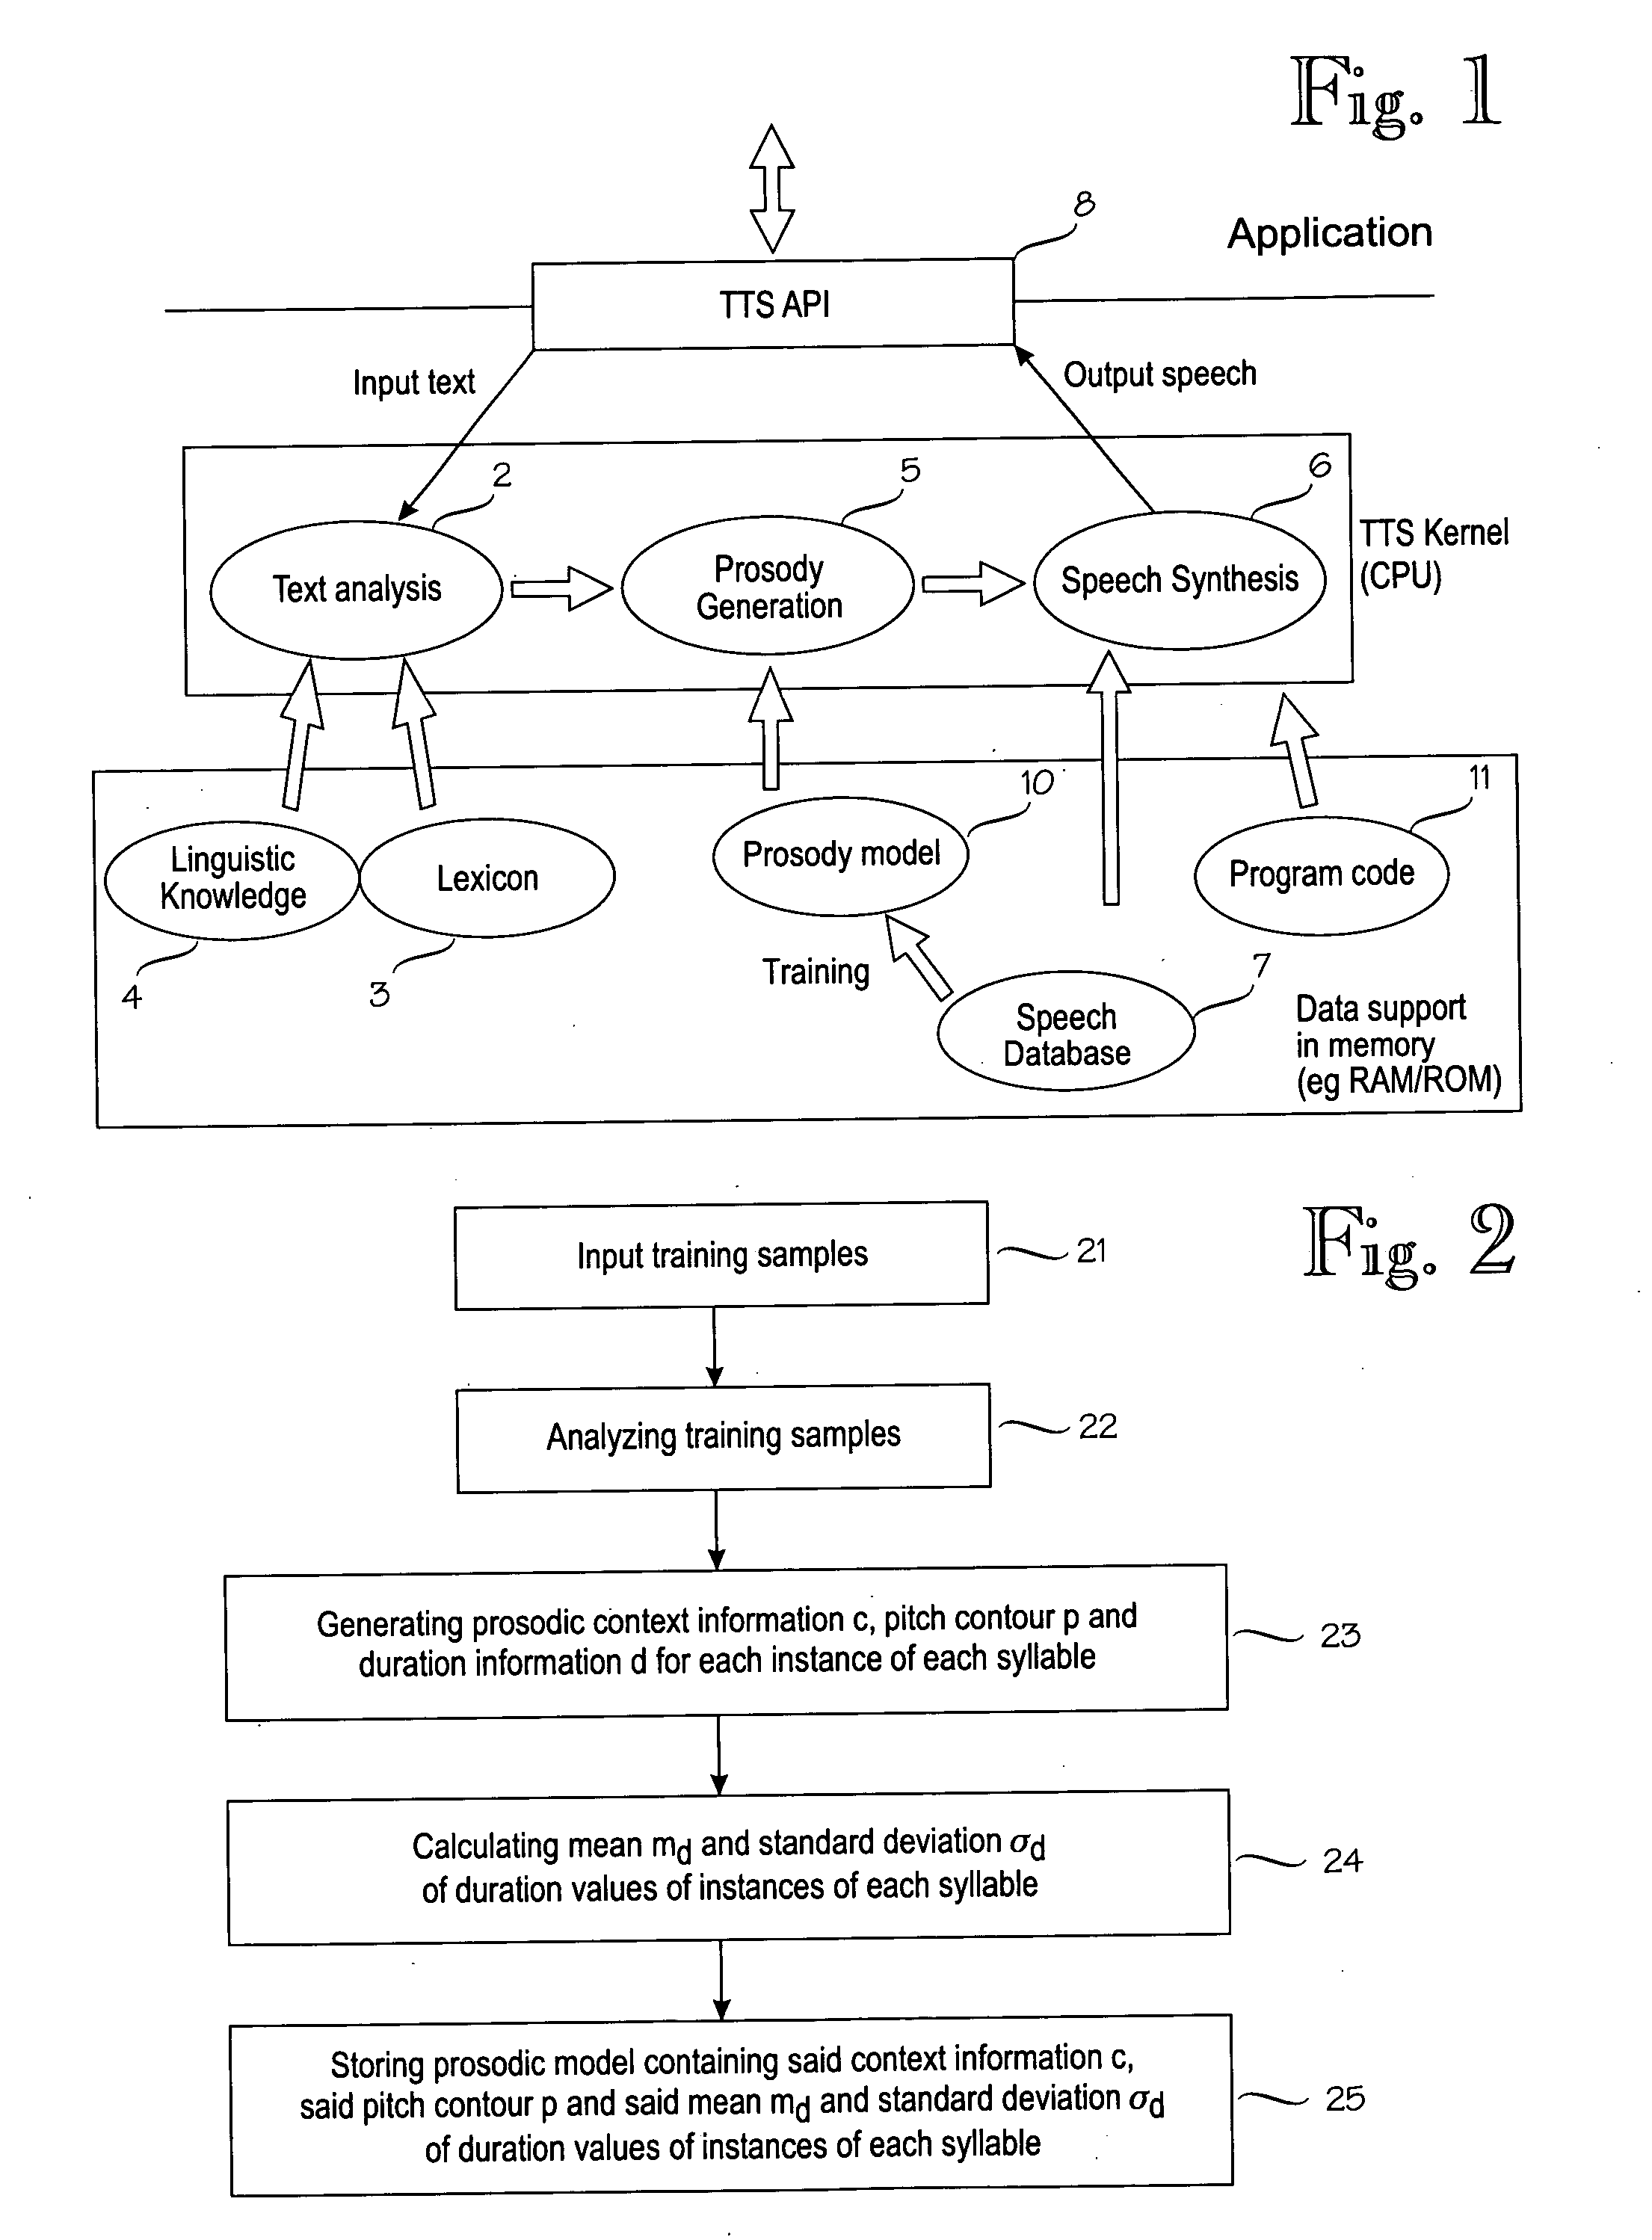 Memory usage in a text-to-speech system